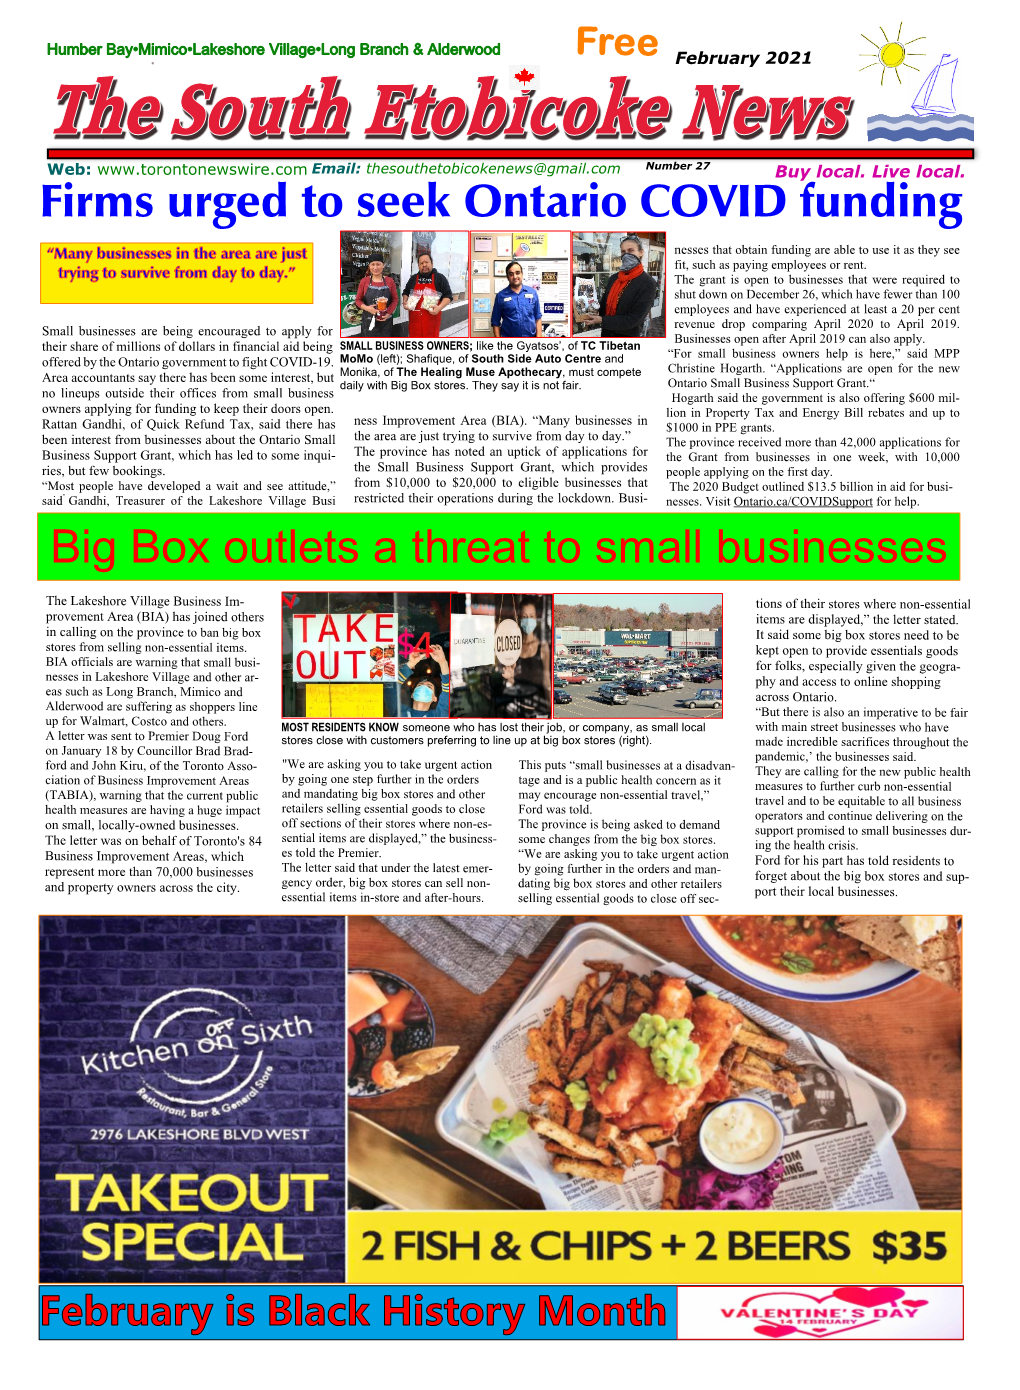 Firms Urged to Seek Ontario COVID Funding Big Box Outlets a Threat To